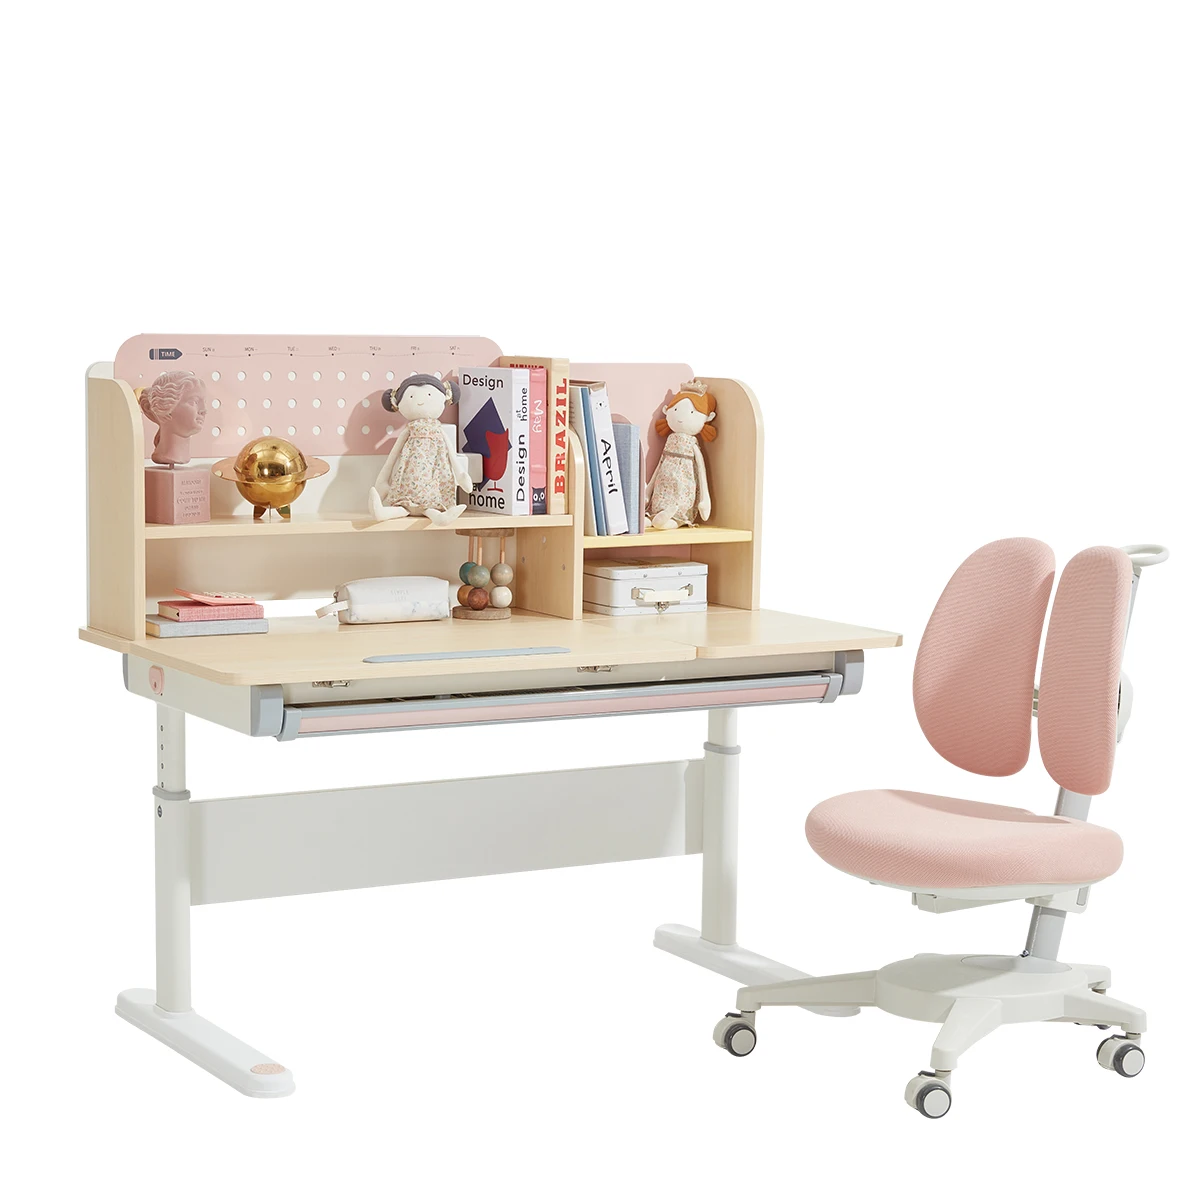 
2M2KIDS Amz Hot Sale Height Adjustable Study Table for Kids Solid Wood Ergonomic Kids Study Desk with Drawer 